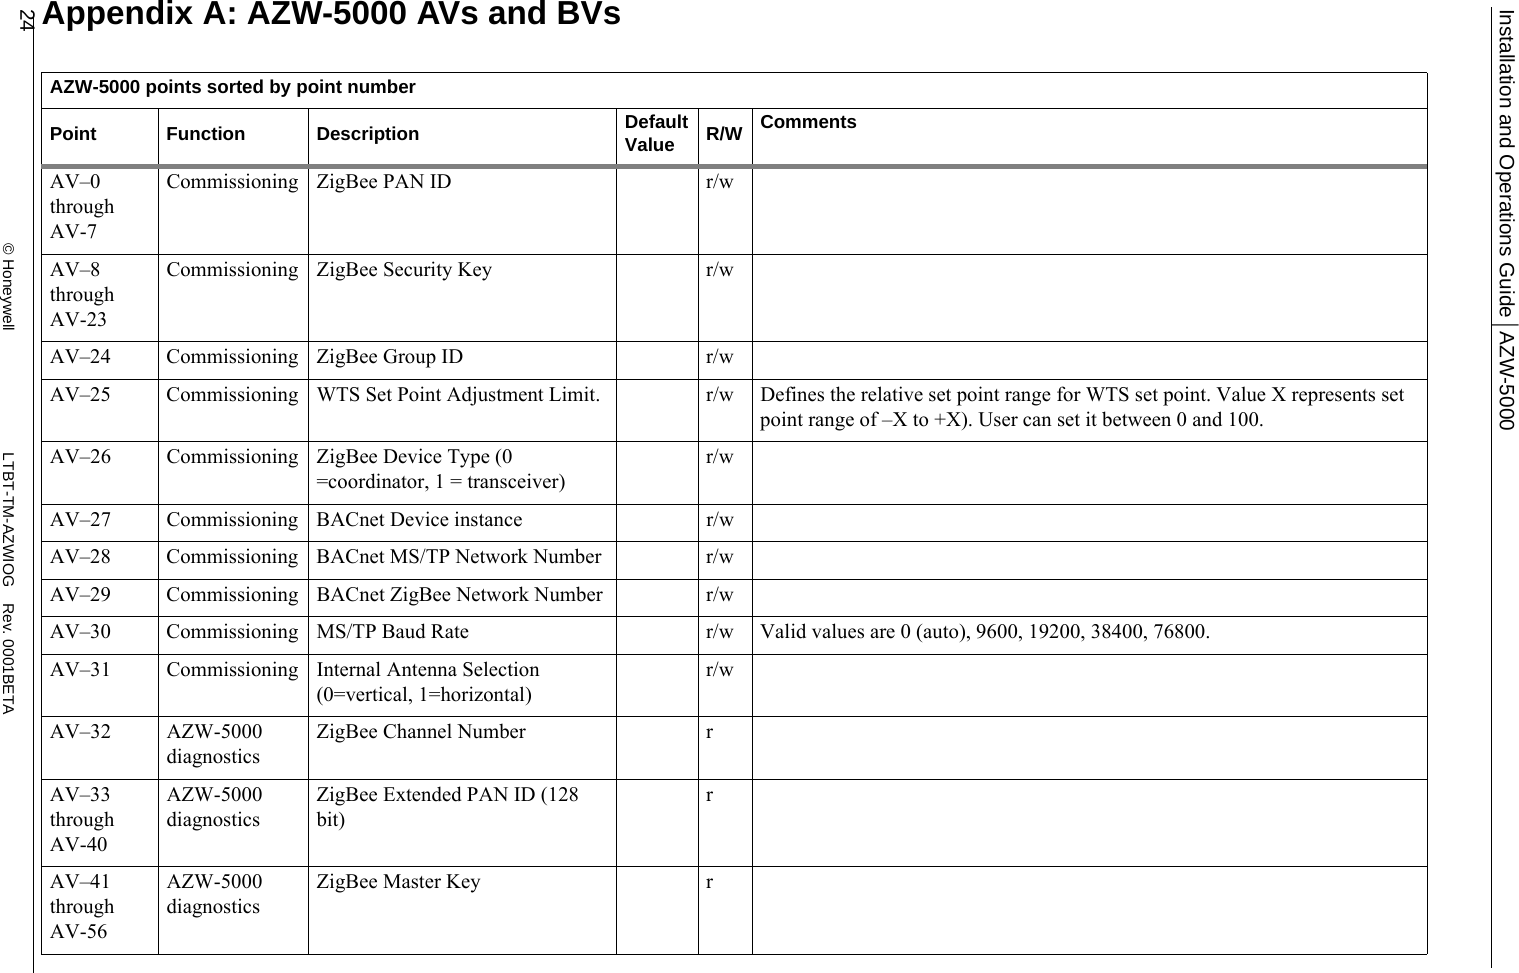 Installation and Operations Guide | AZW-500024                                                      © Honeywell                            LTBT-TM-AZWIOG Rev. 0001BETAAppendix A: AZW-5000 AVs and BVsAZW-5000 points sorted by point numberPoint Function Description DefaultValue R/W CommentsAV–0throughAV-7Commissioning ZigBee PAN ID r/wAV–8throughAV-23Commissioning ZigBee Security Key r/wAV–24 Commissioning ZigBee Group ID r/wAV–25 Commissioning WTS Set Point Adjustment Limit.  r/w Defines the relative set point range for WTS set point. Value X represents set point range of –X to +X). User can set it between 0 and 100.AV–26 Commissioning ZigBee Device Type (0 =coordinator, 1 = transceiver)r/wAV–27 Commissioning BACnet Device instance r/wAV–28 Commissioning BACnet MS/TP Network Number r/wAV–29 Commissioning BACnet ZigBee Network Number r/wAV–30 Commissioning MS/TP Baud Rate r/w Valid values are 0 (auto), 9600, 19200, 38400, 76800.AV–31 Commissioning Internal Antenna Selection (0=vertical, 1=horizontal)r/wAV–32 AZW-5000 diagnosticsZigBee Channel Number rAV–33throughAV-40AZW-5000 diagnosticsZigBee Extended PAN ID (128 bit) rAV–41throughAV-56AZW-5000 diagnosticsZigBee Master Key r